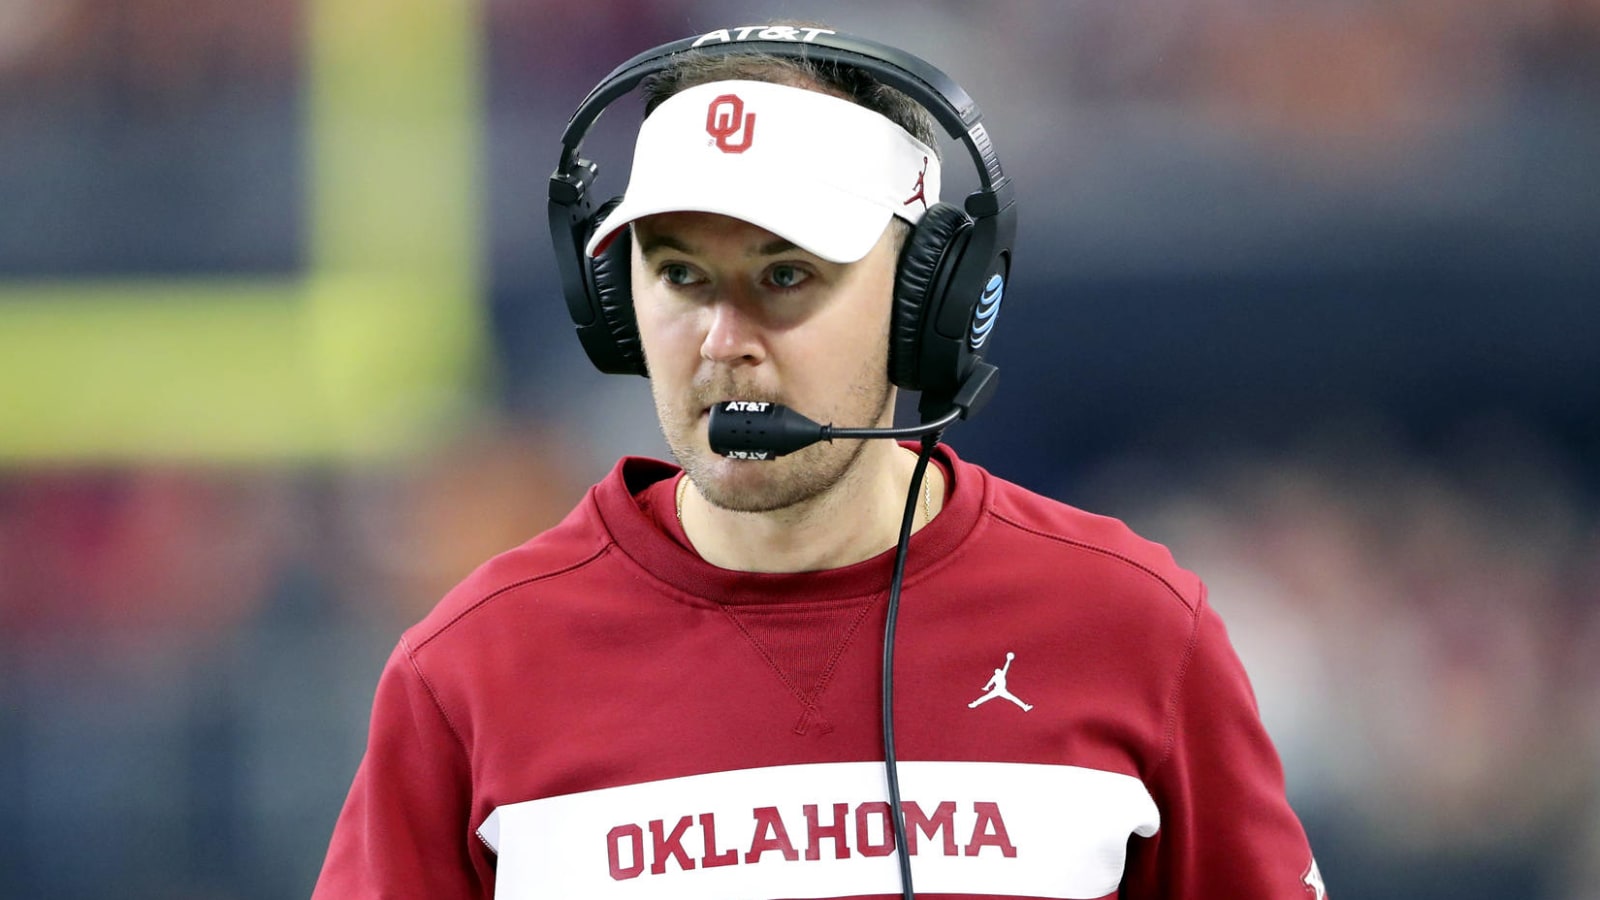 Oklahoma’s Lincoln Riley has no interest in NFL job